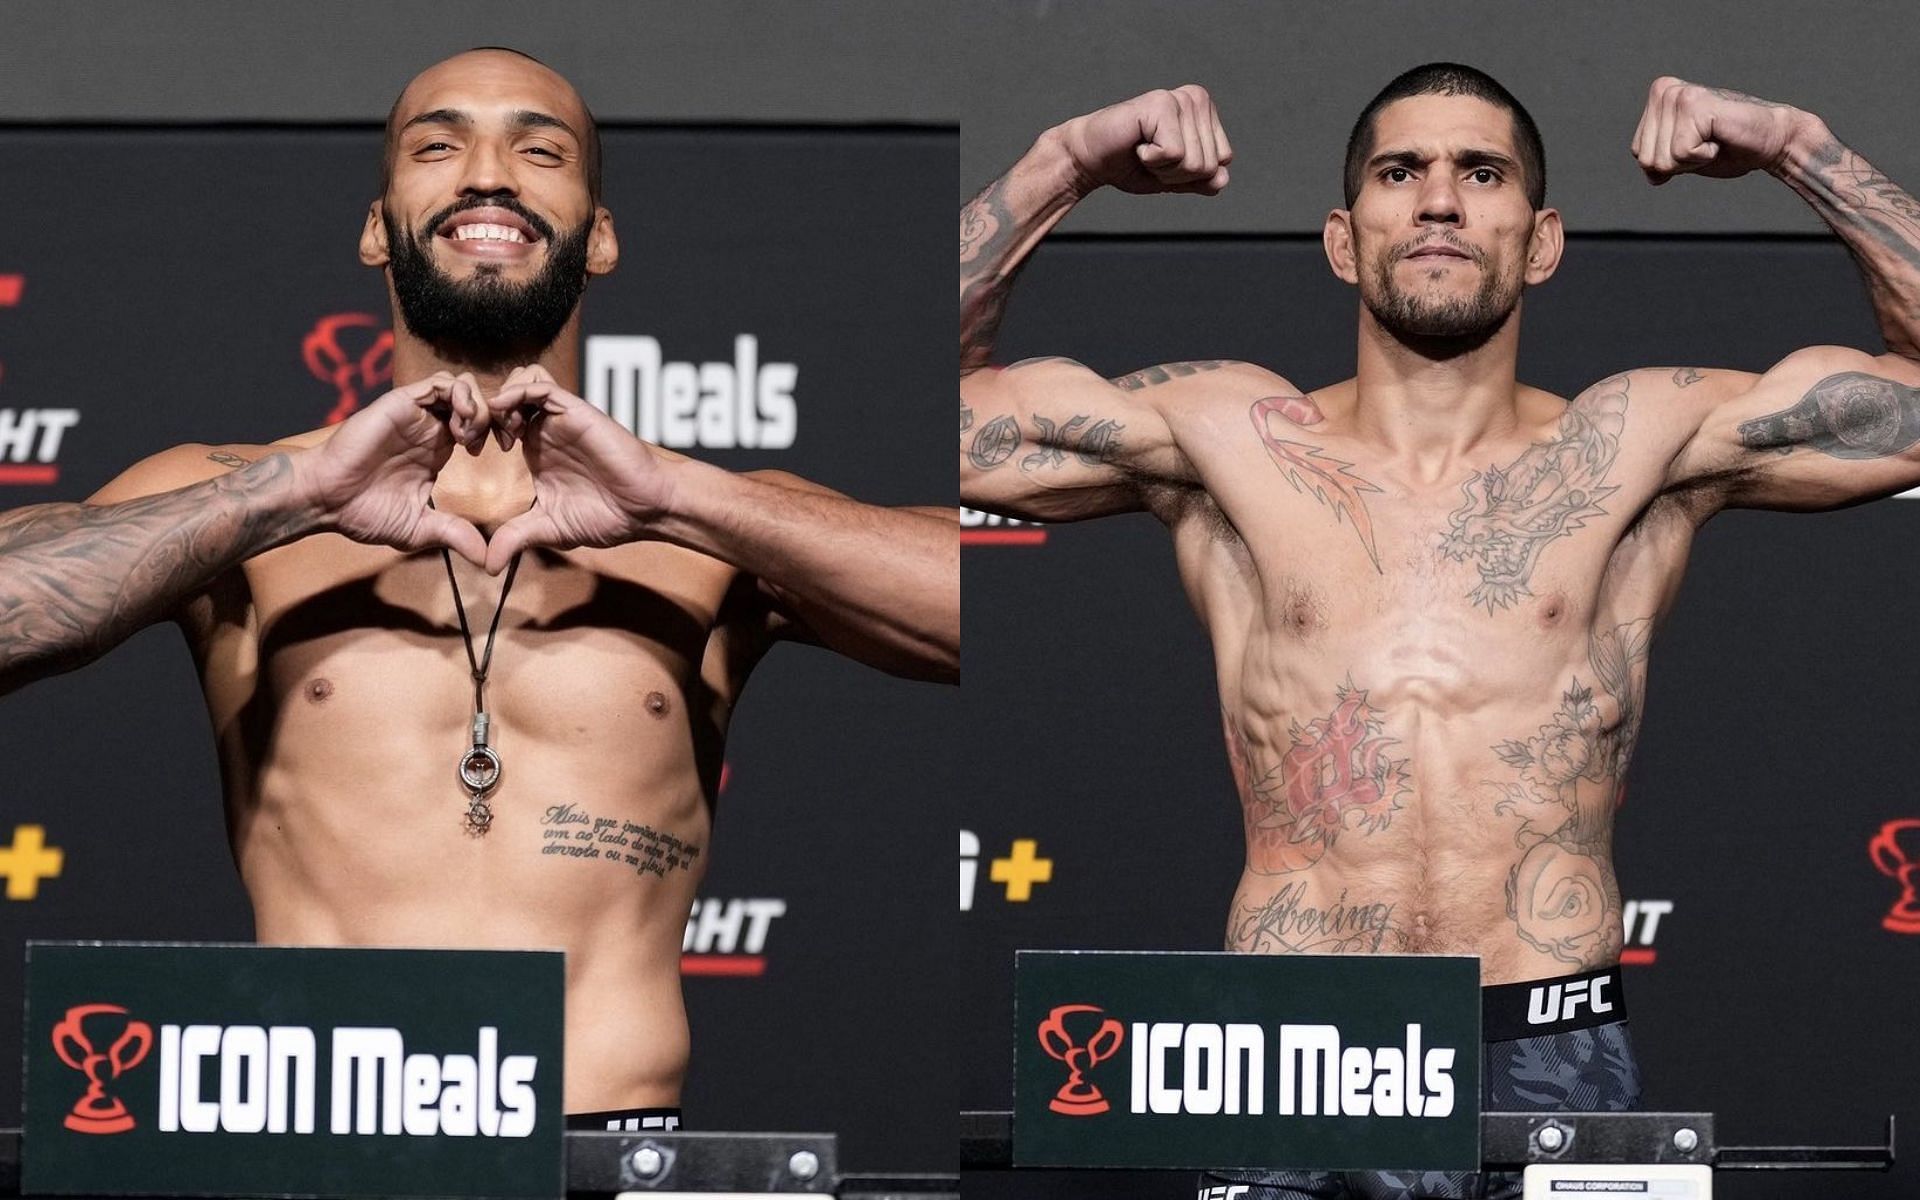 Bruno Silva (left), Alex Pereira (right) [Images courtesy of @The_MMA_Media on Twitter]